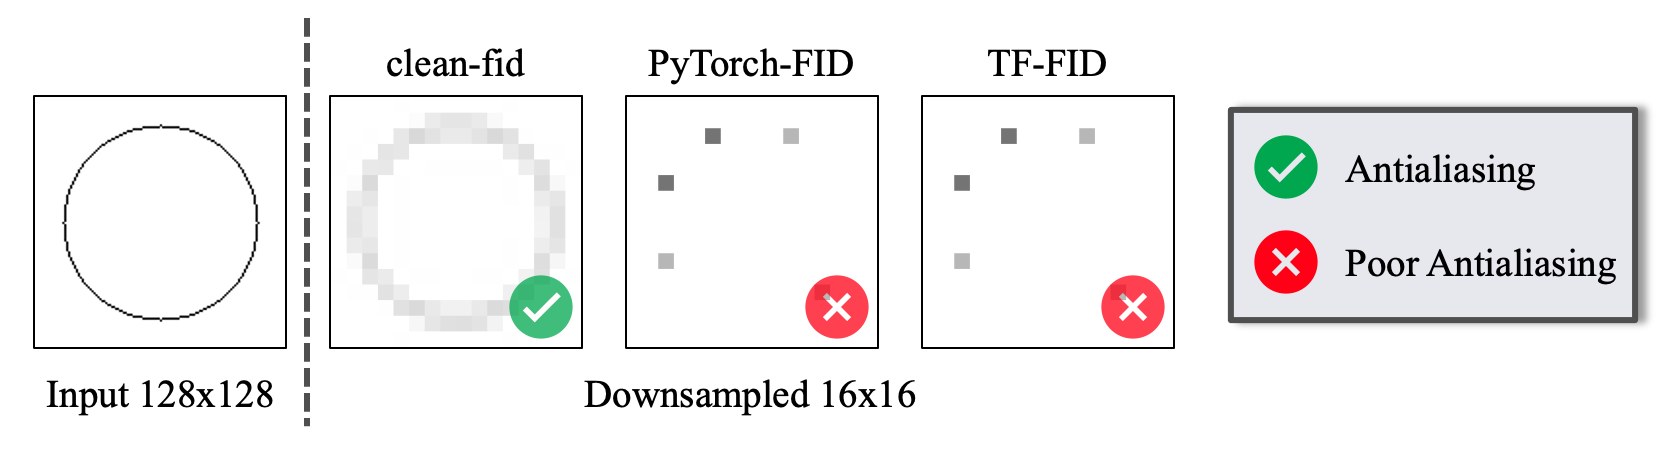 GitHub - GaParmar/clean-fid: PyTorch - FID calculation with proper image  resizing and quantization steps [CVPR 2022]